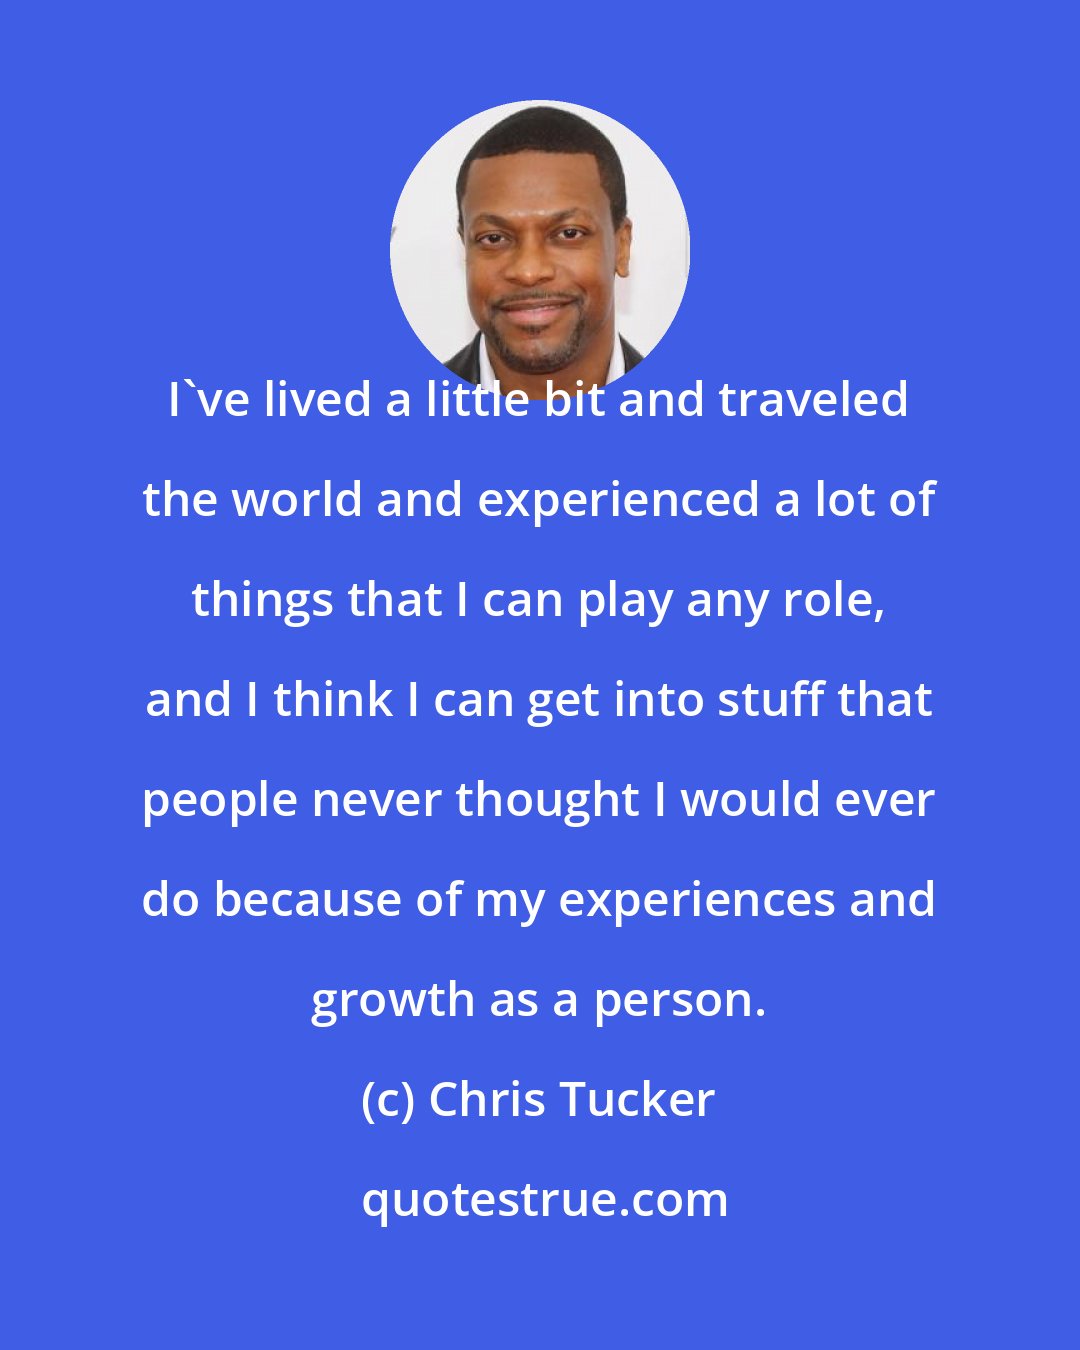 Chris Tucker: I've lived a little bit and traveled the world and experienced a lot of things that I can play any role, and I think I can get into stuff that people never thought I would ever do because of my experiences and growth as a person.